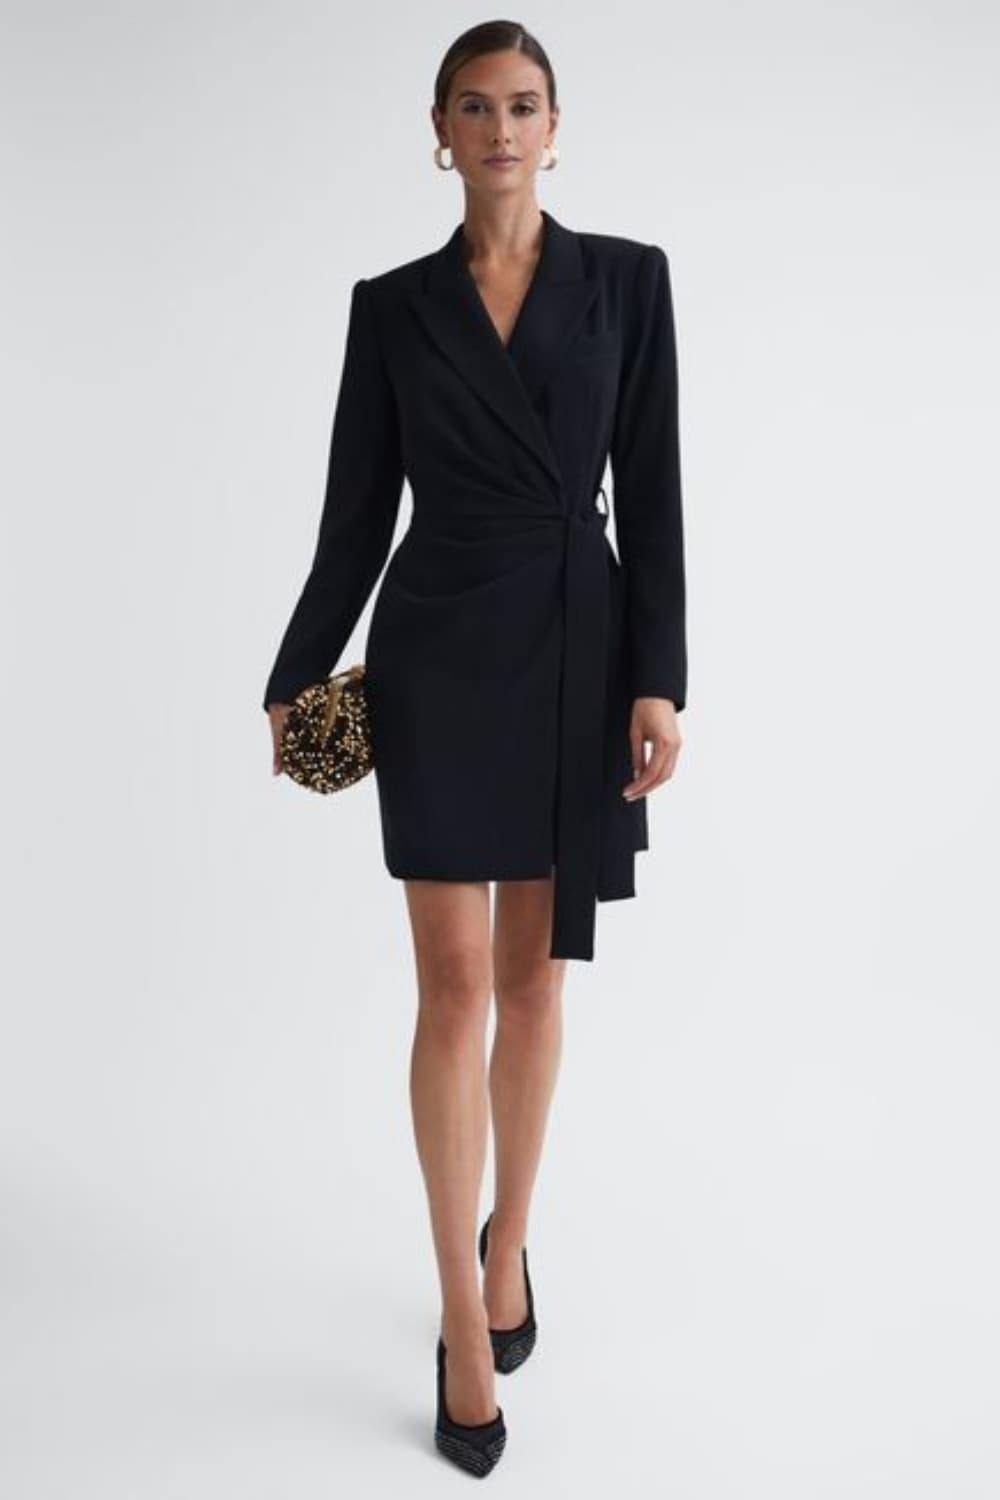 Blazer Dress Work Dinner Party Outfit